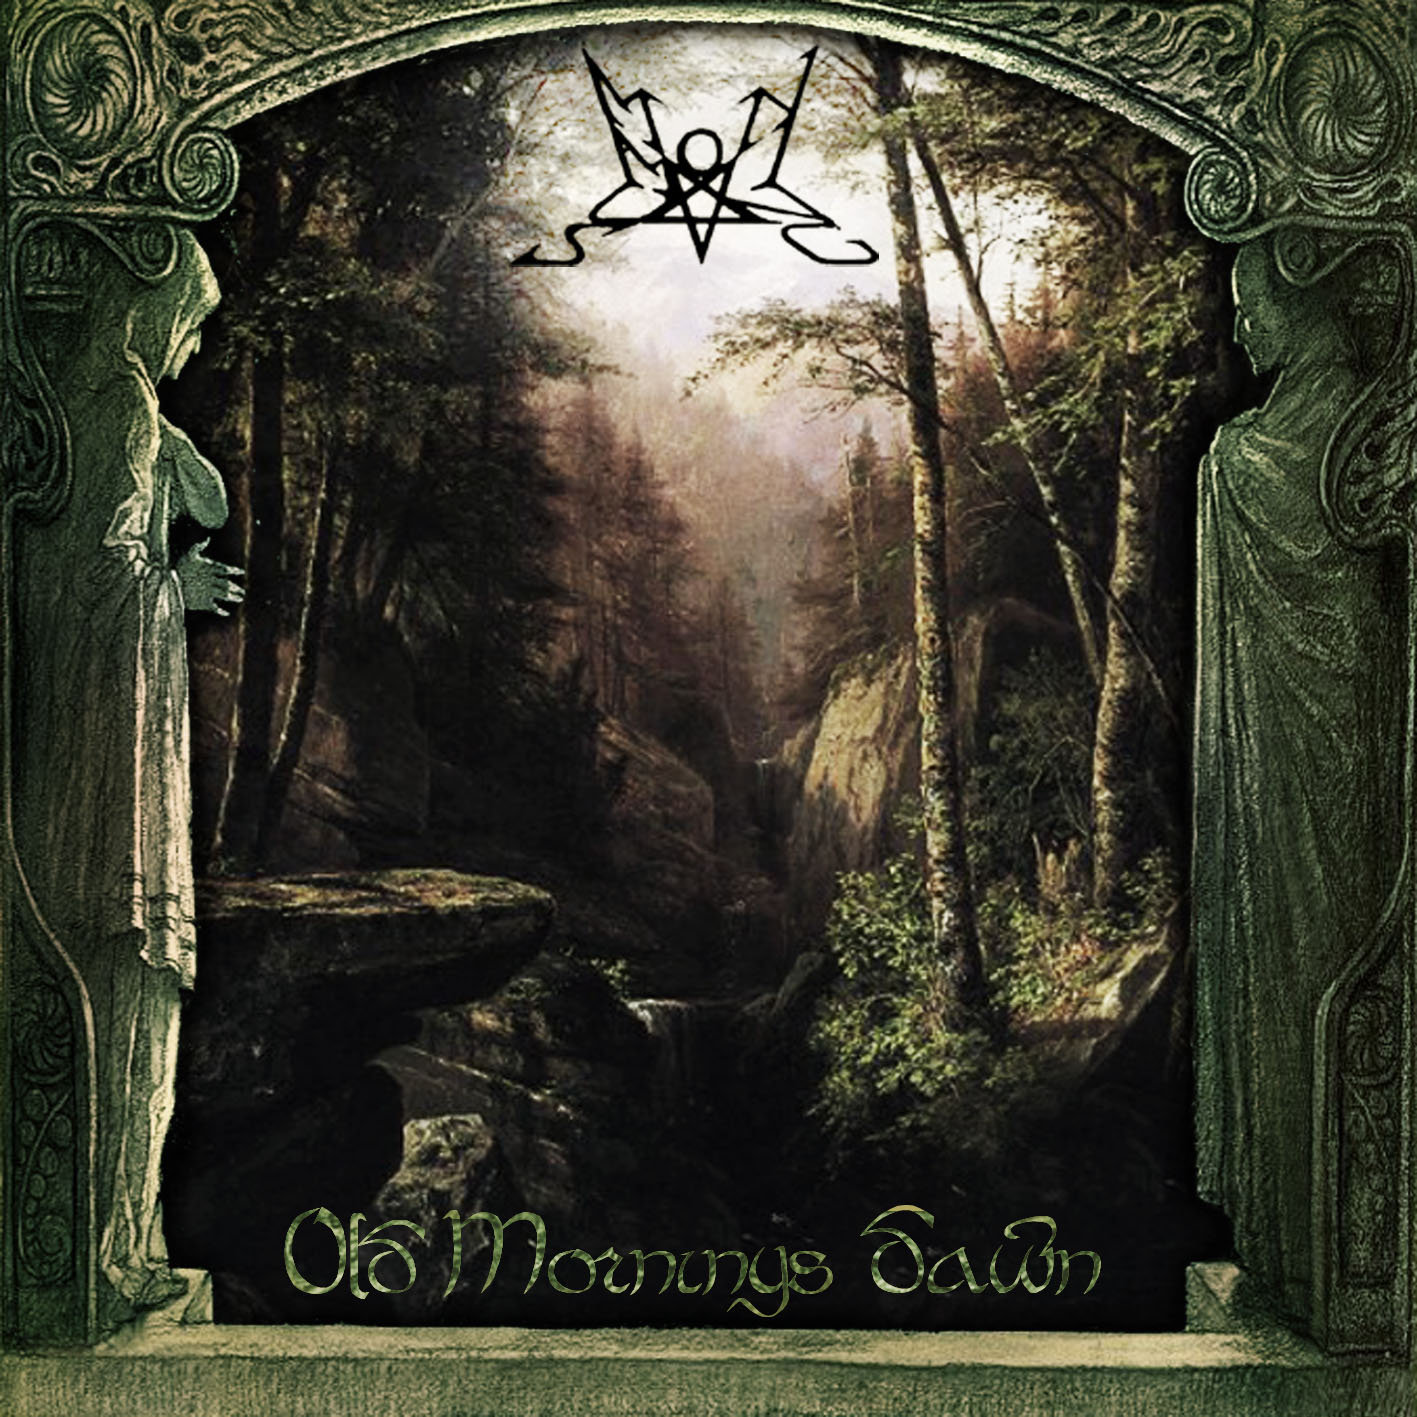 News Added Jan 22, 2013 Atmospheric black metal veterans Summoning have posted an update on their website confirming that they are about to finish their upcoming album Old Mornings Dawn. Furthermore, they stated that there will be an English speaking guest on the album doing narration on two songs. The release date is now planned […]